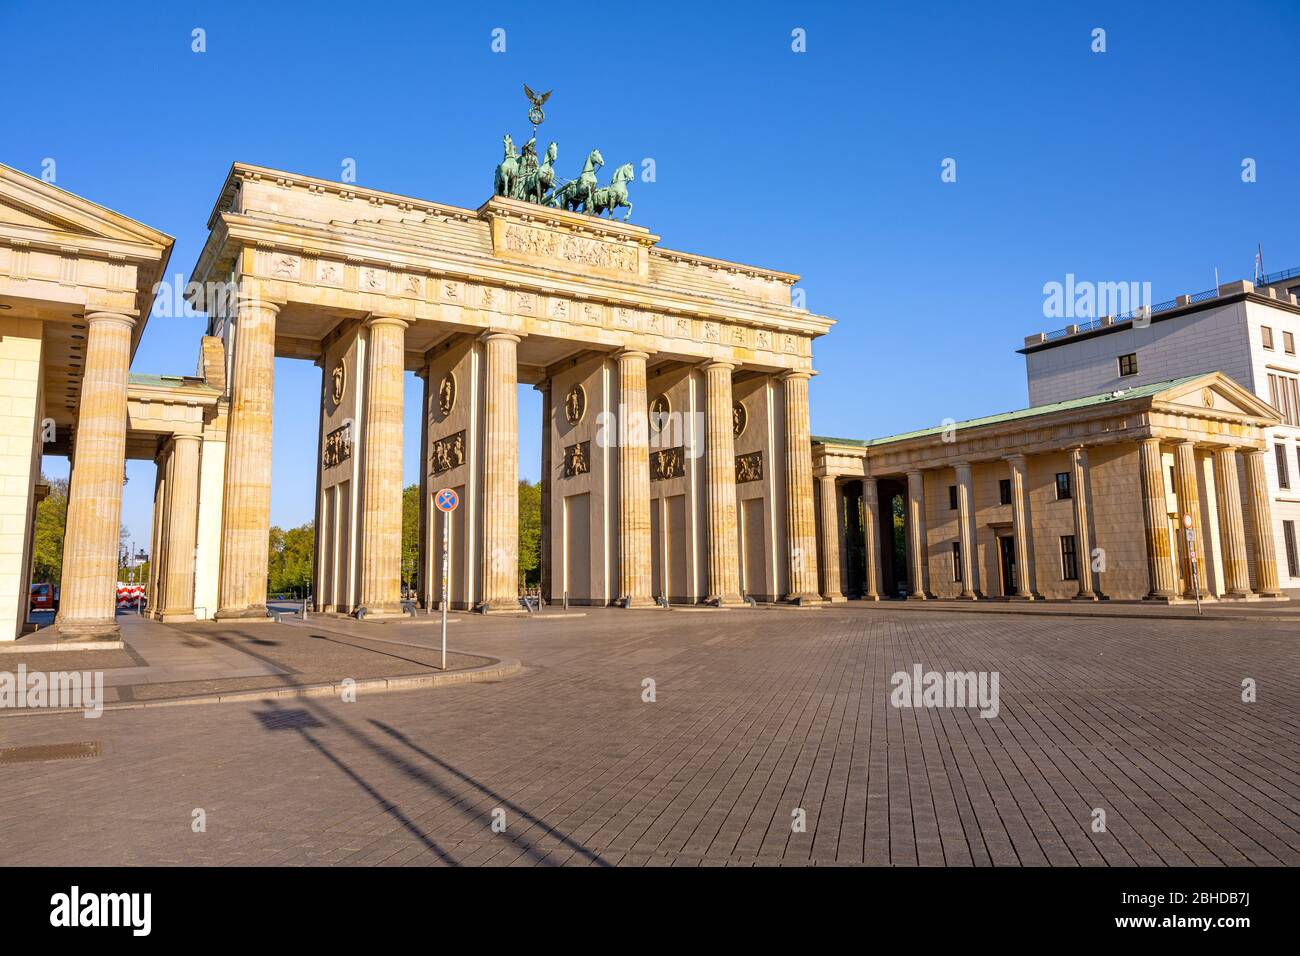 The famous Brandenburger Tor in Berlin early in the morning with no people Stock Photo